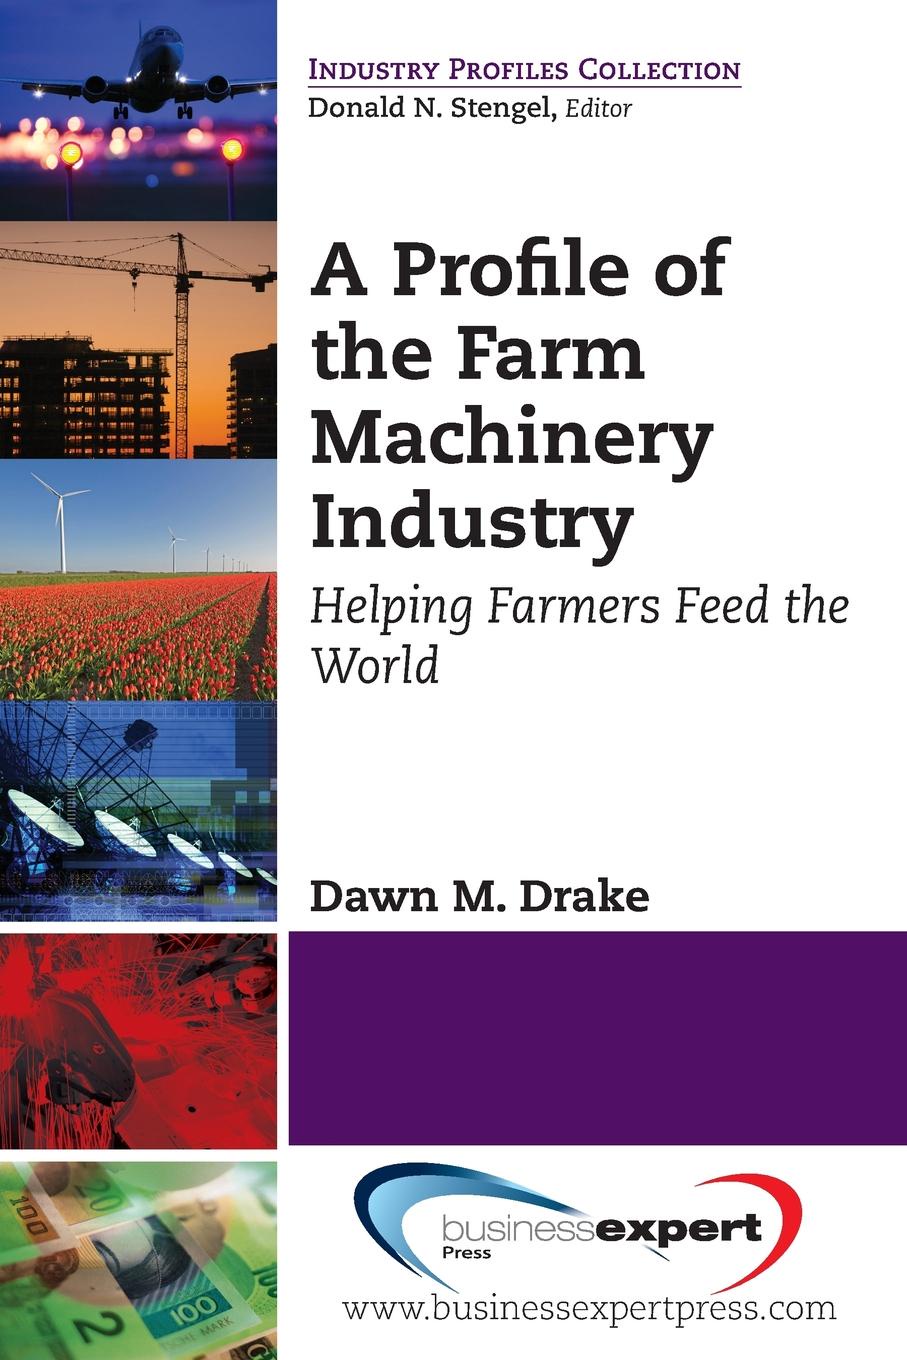 A Profile of the Farm Machinery Industry. Helping Farmers Feed the World